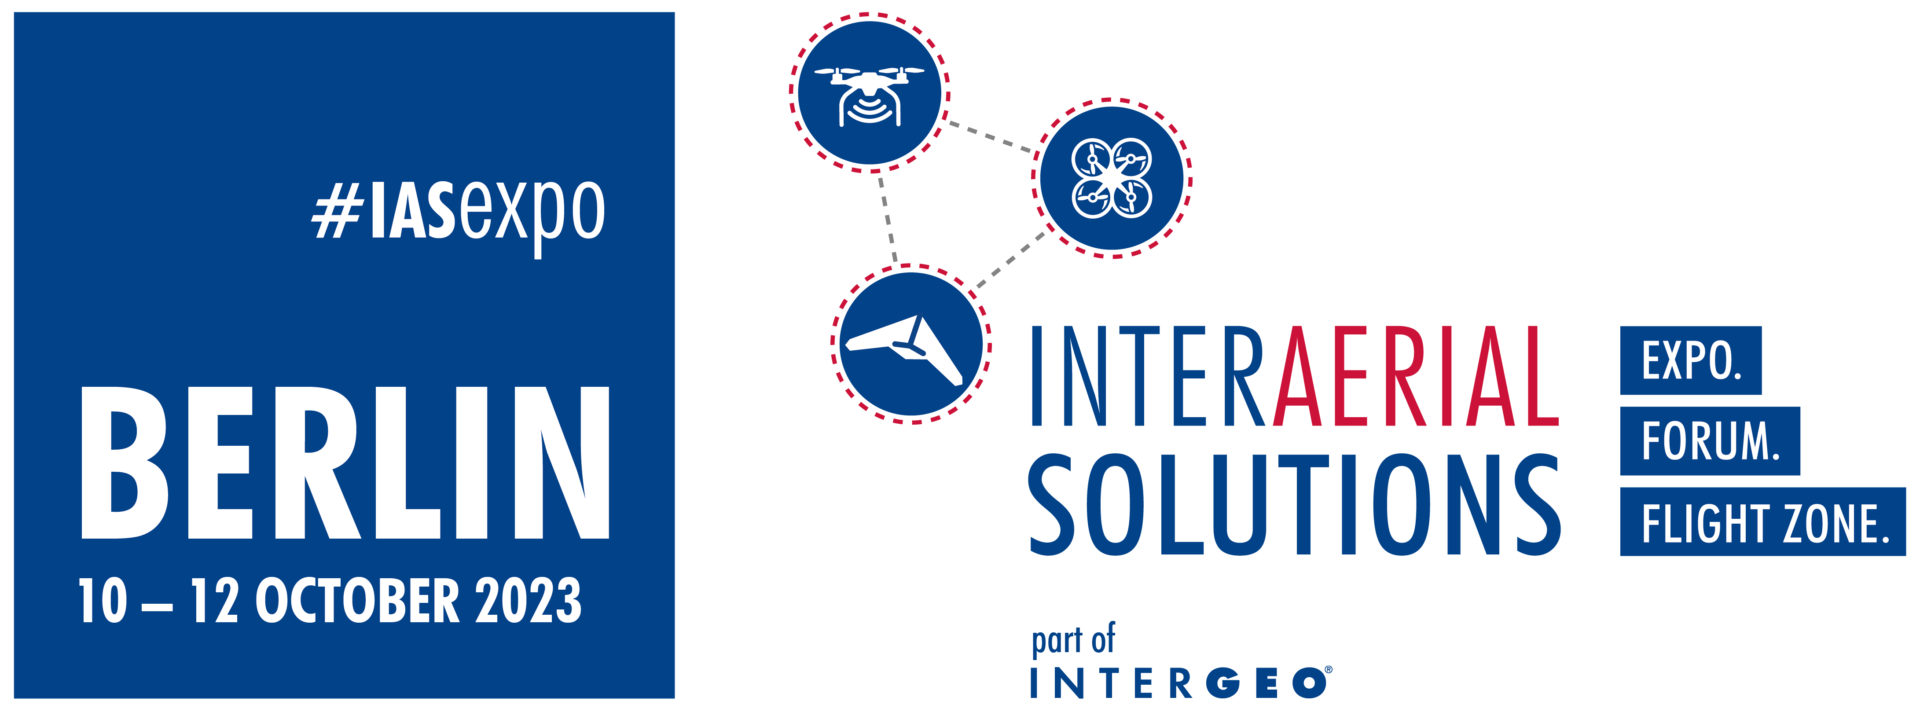 INTERAREAL SOLUTIONS 2022